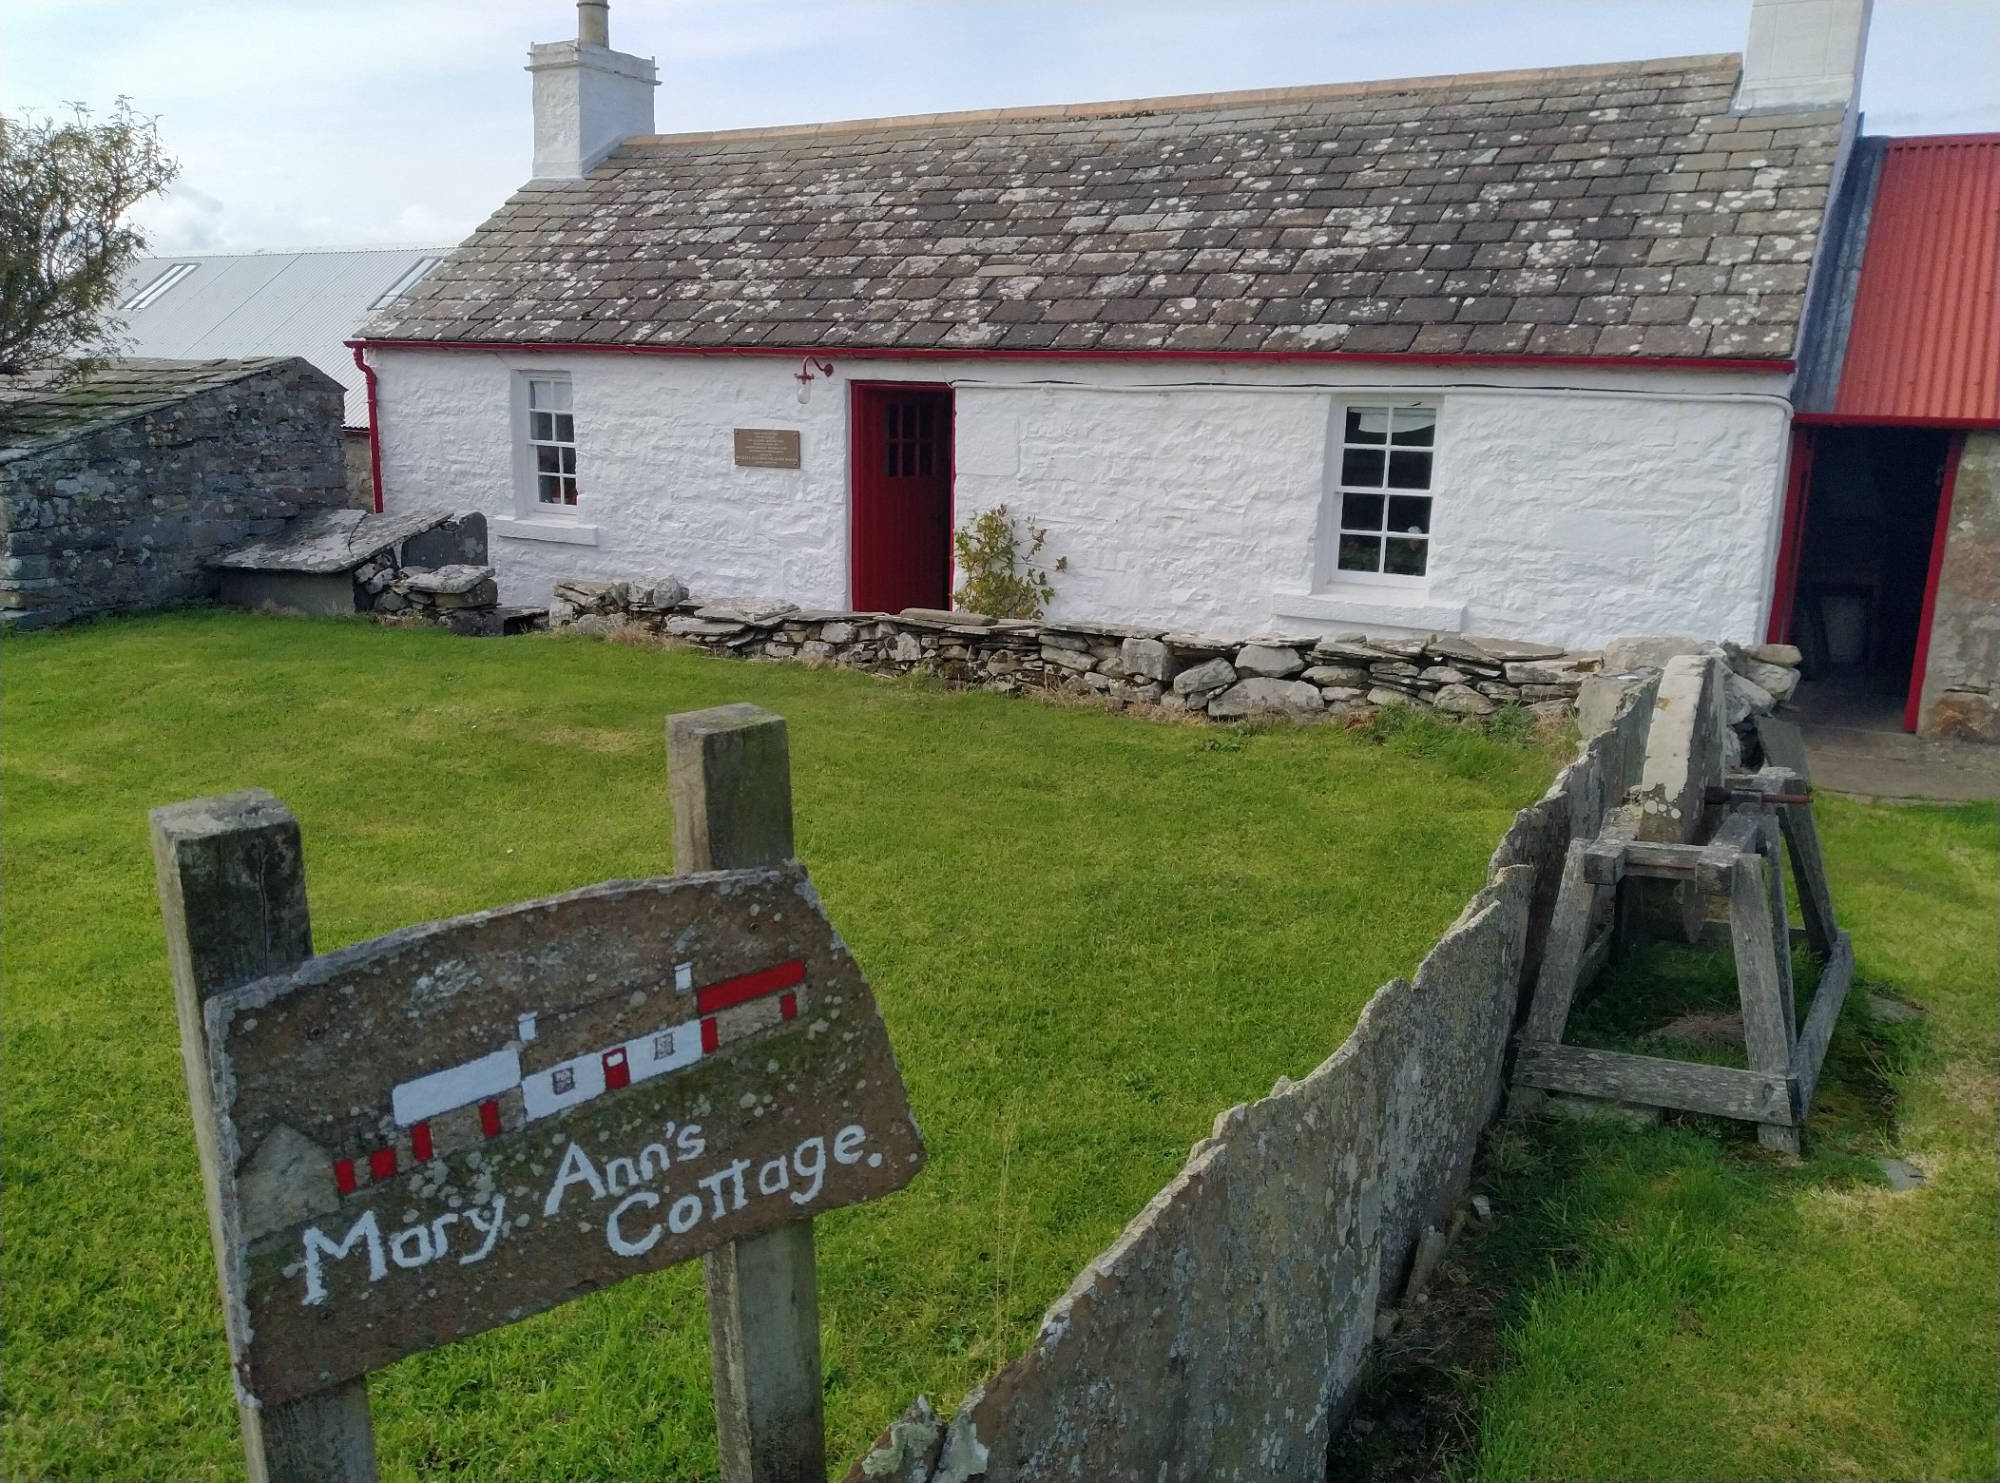 Mary Anne's Cottage